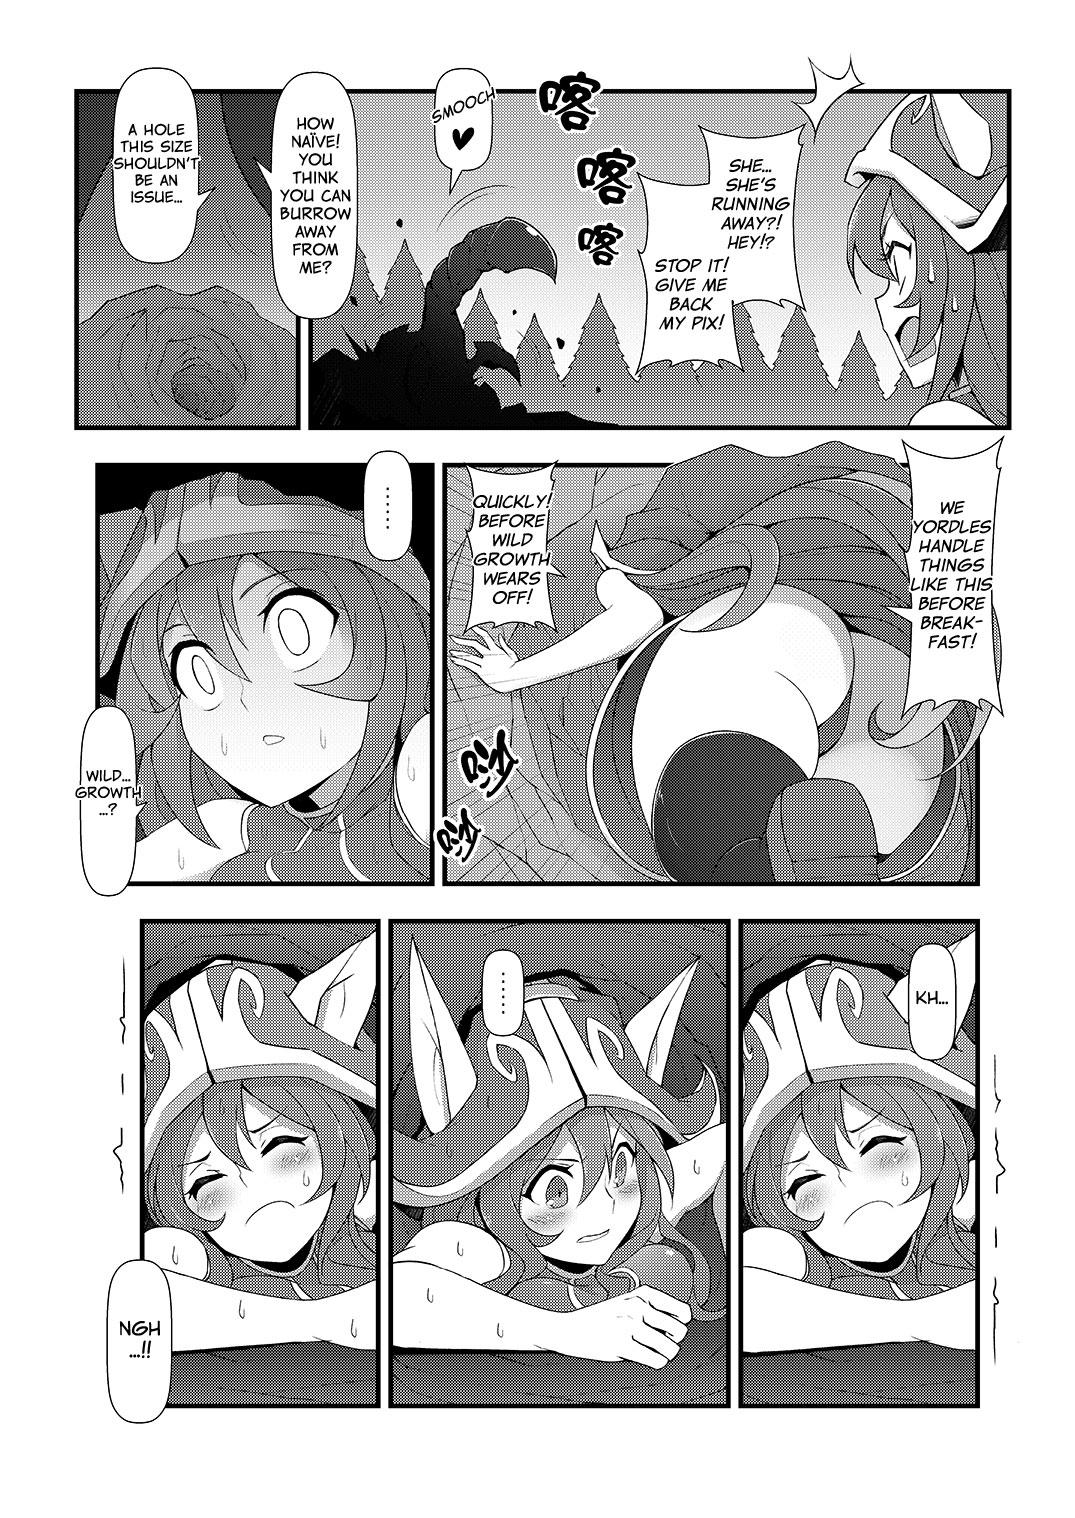 Delicia ININ Renmei 2 | ININ League 2 - League of legends Nasty Free Porn - Page 4